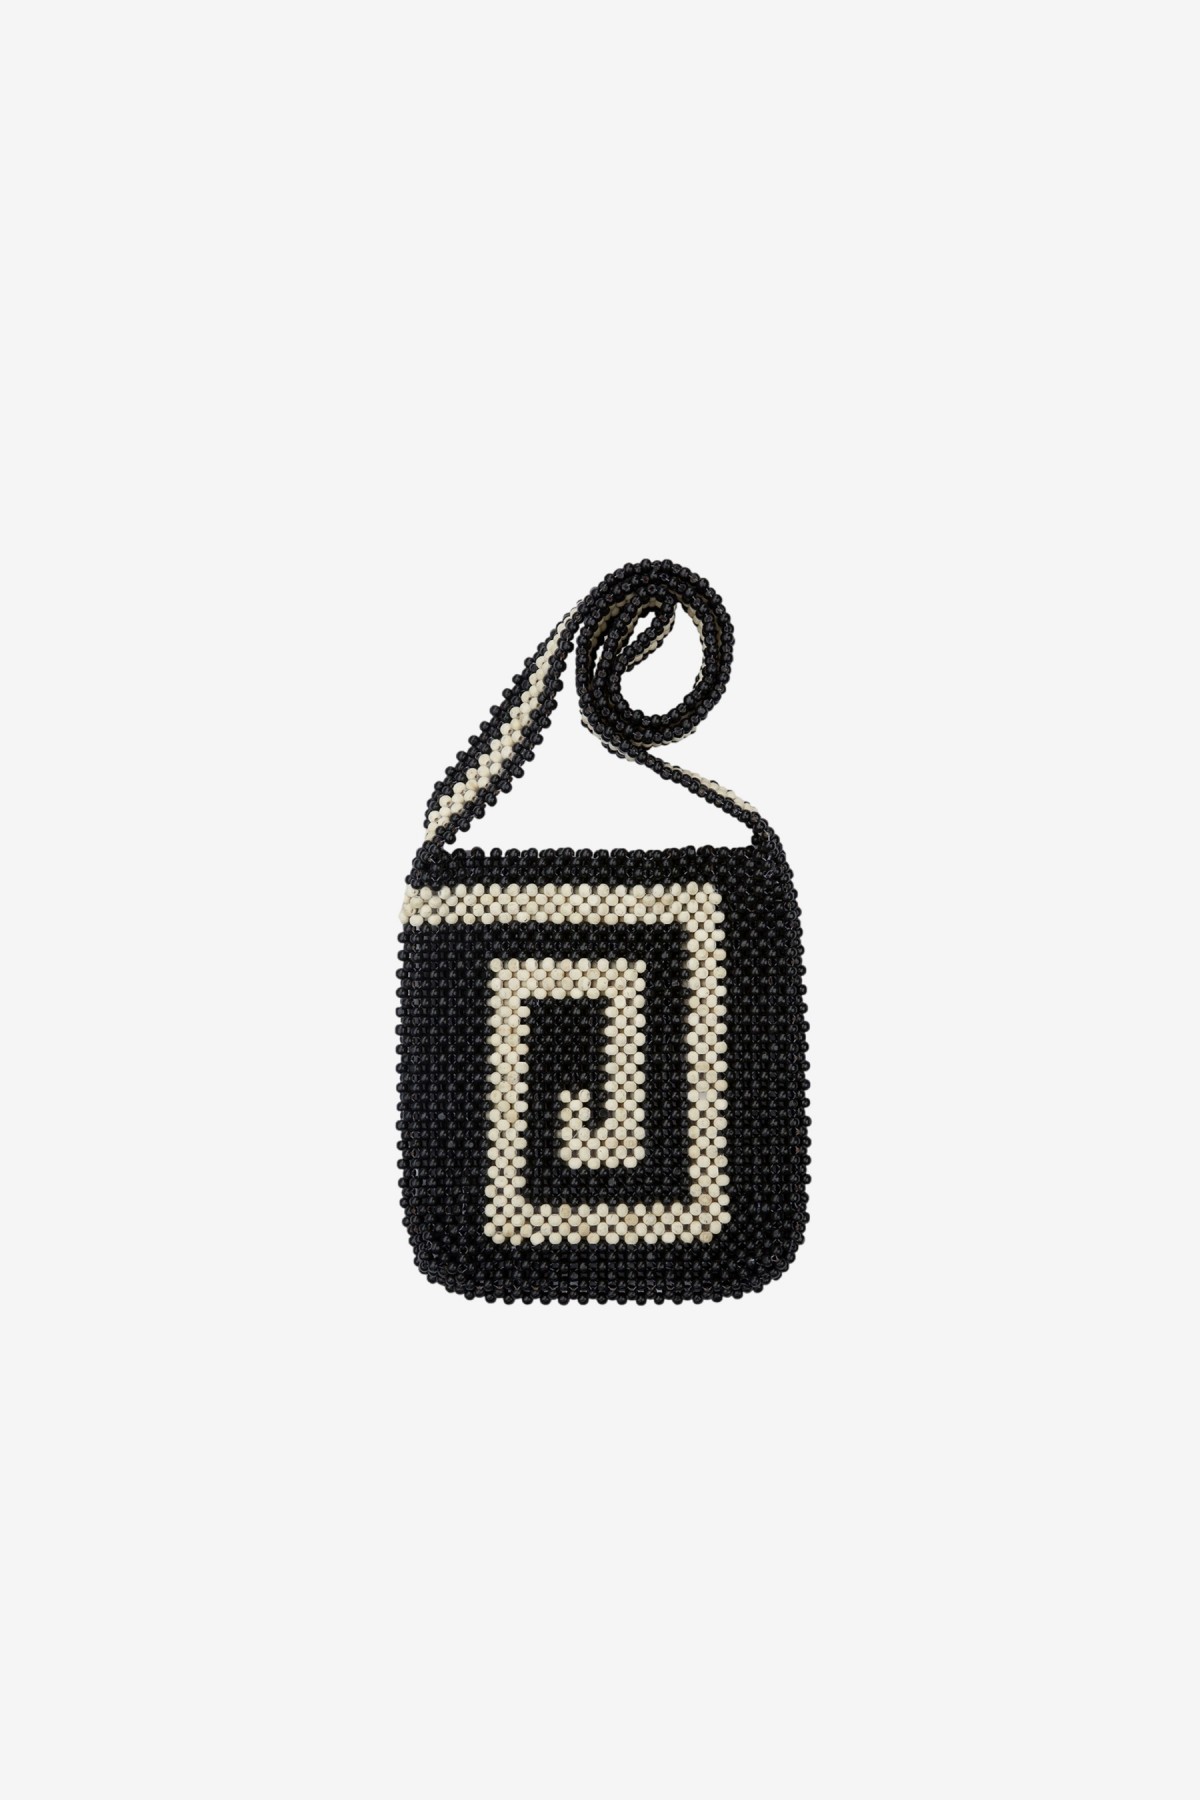 YMC You Must Create Wooden Bead Bag in Black- White